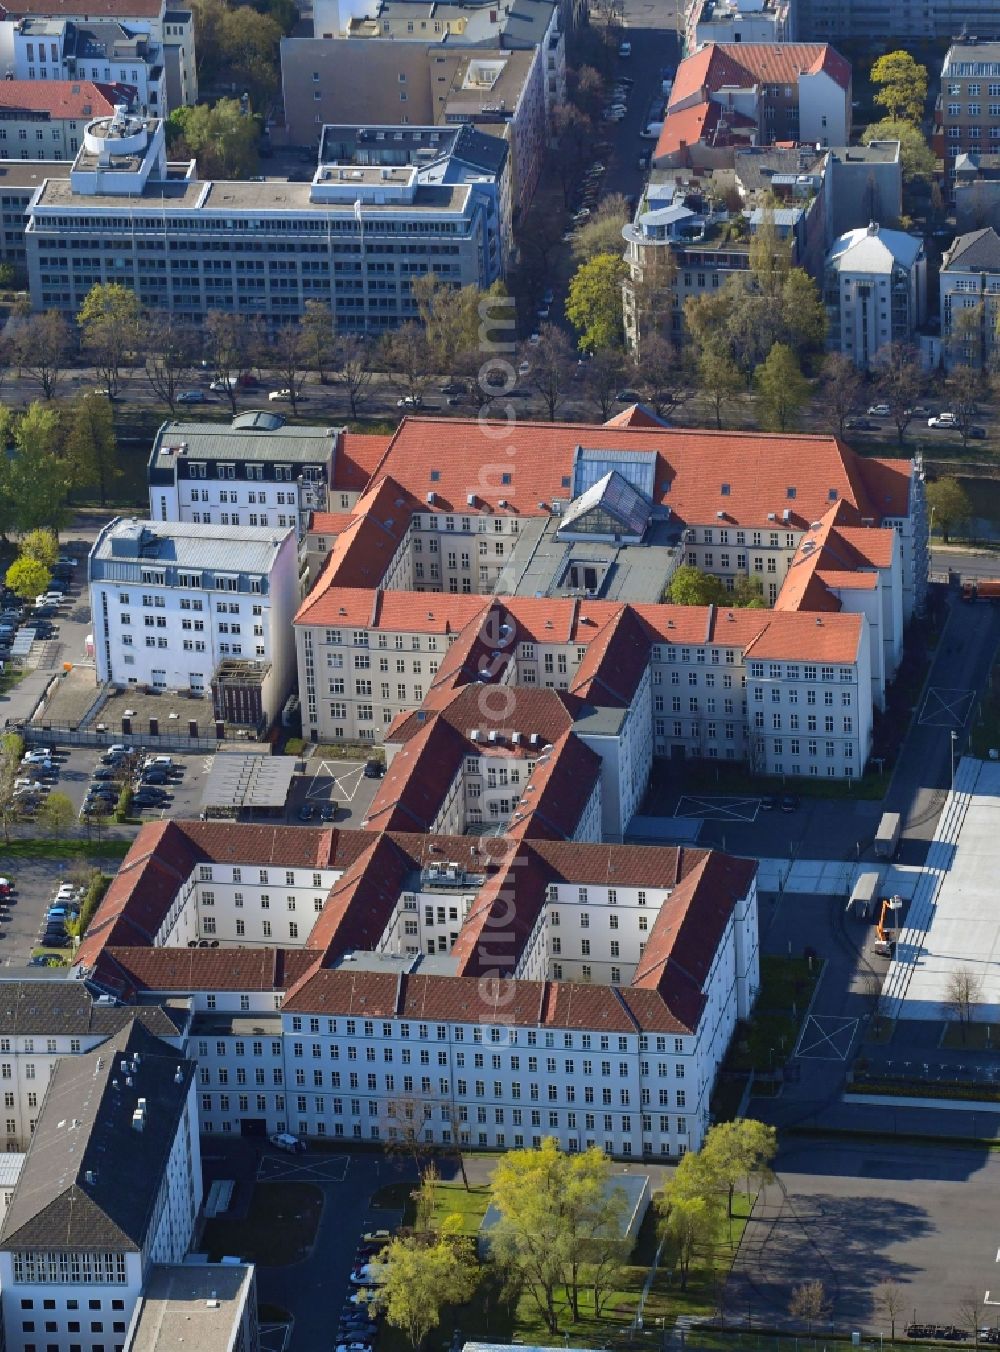 Berlin from the bird's eye view: View of the ministry of defence in the Bendlerblock area of the Tiergarten part of Berlin in Germany